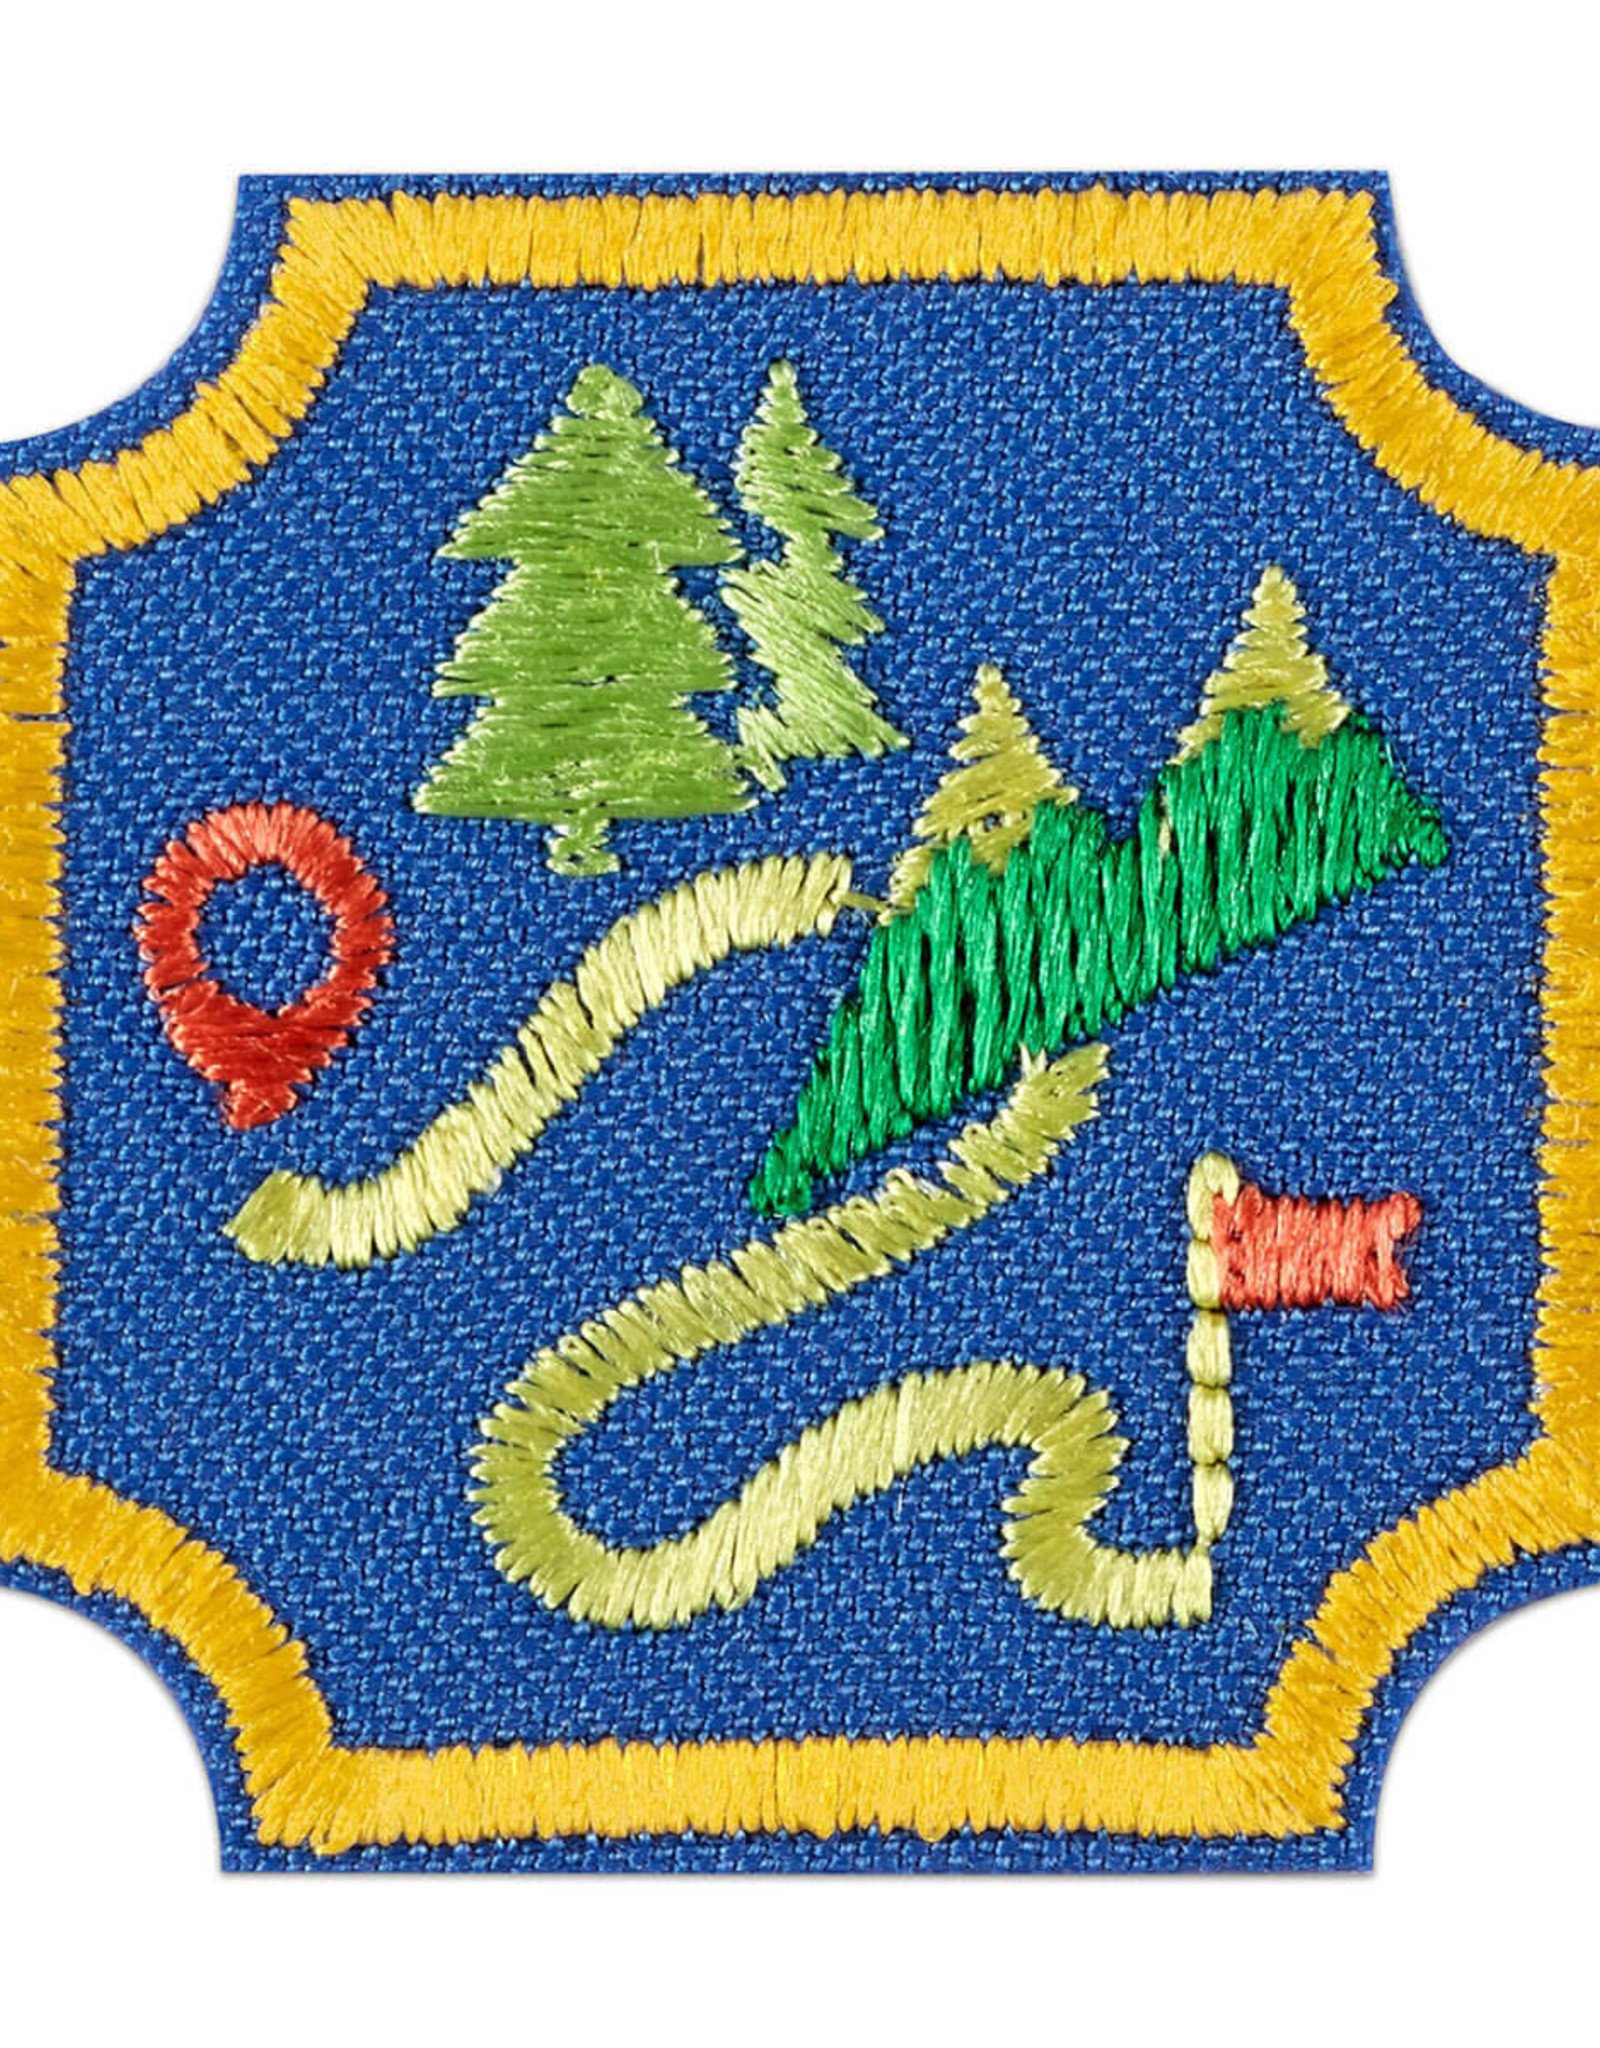 GIRL SCOUTS OF THE USA Ambassador Trail Adventure Badge